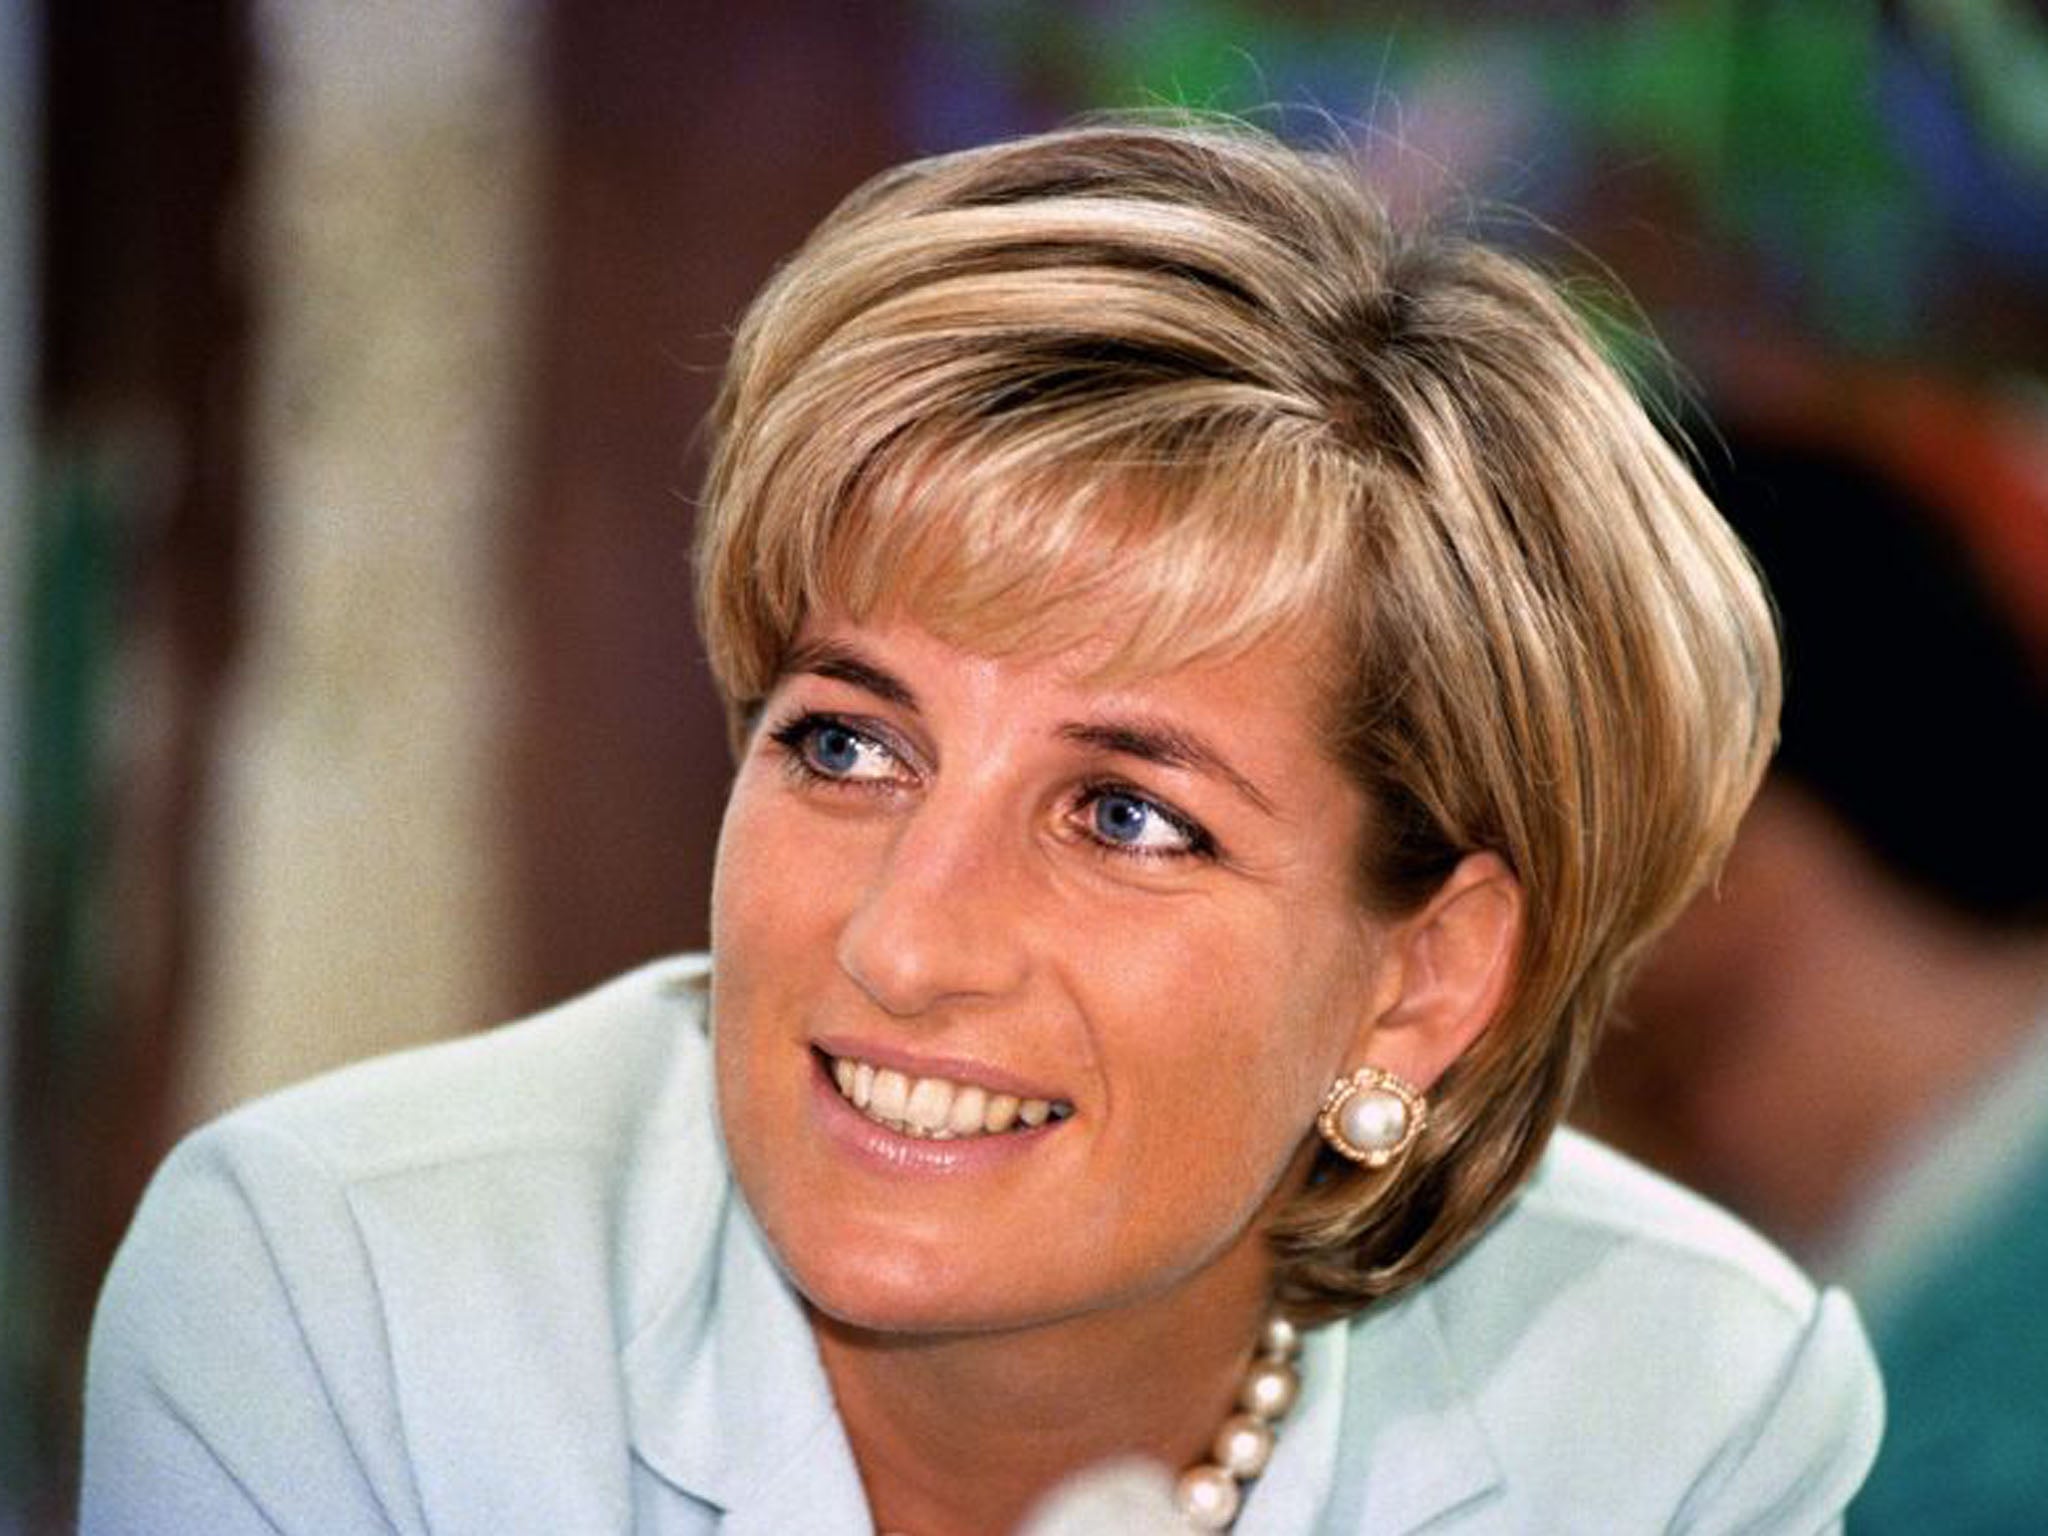 Scotland Yard are “scoping” new information about the death of Princess Diana